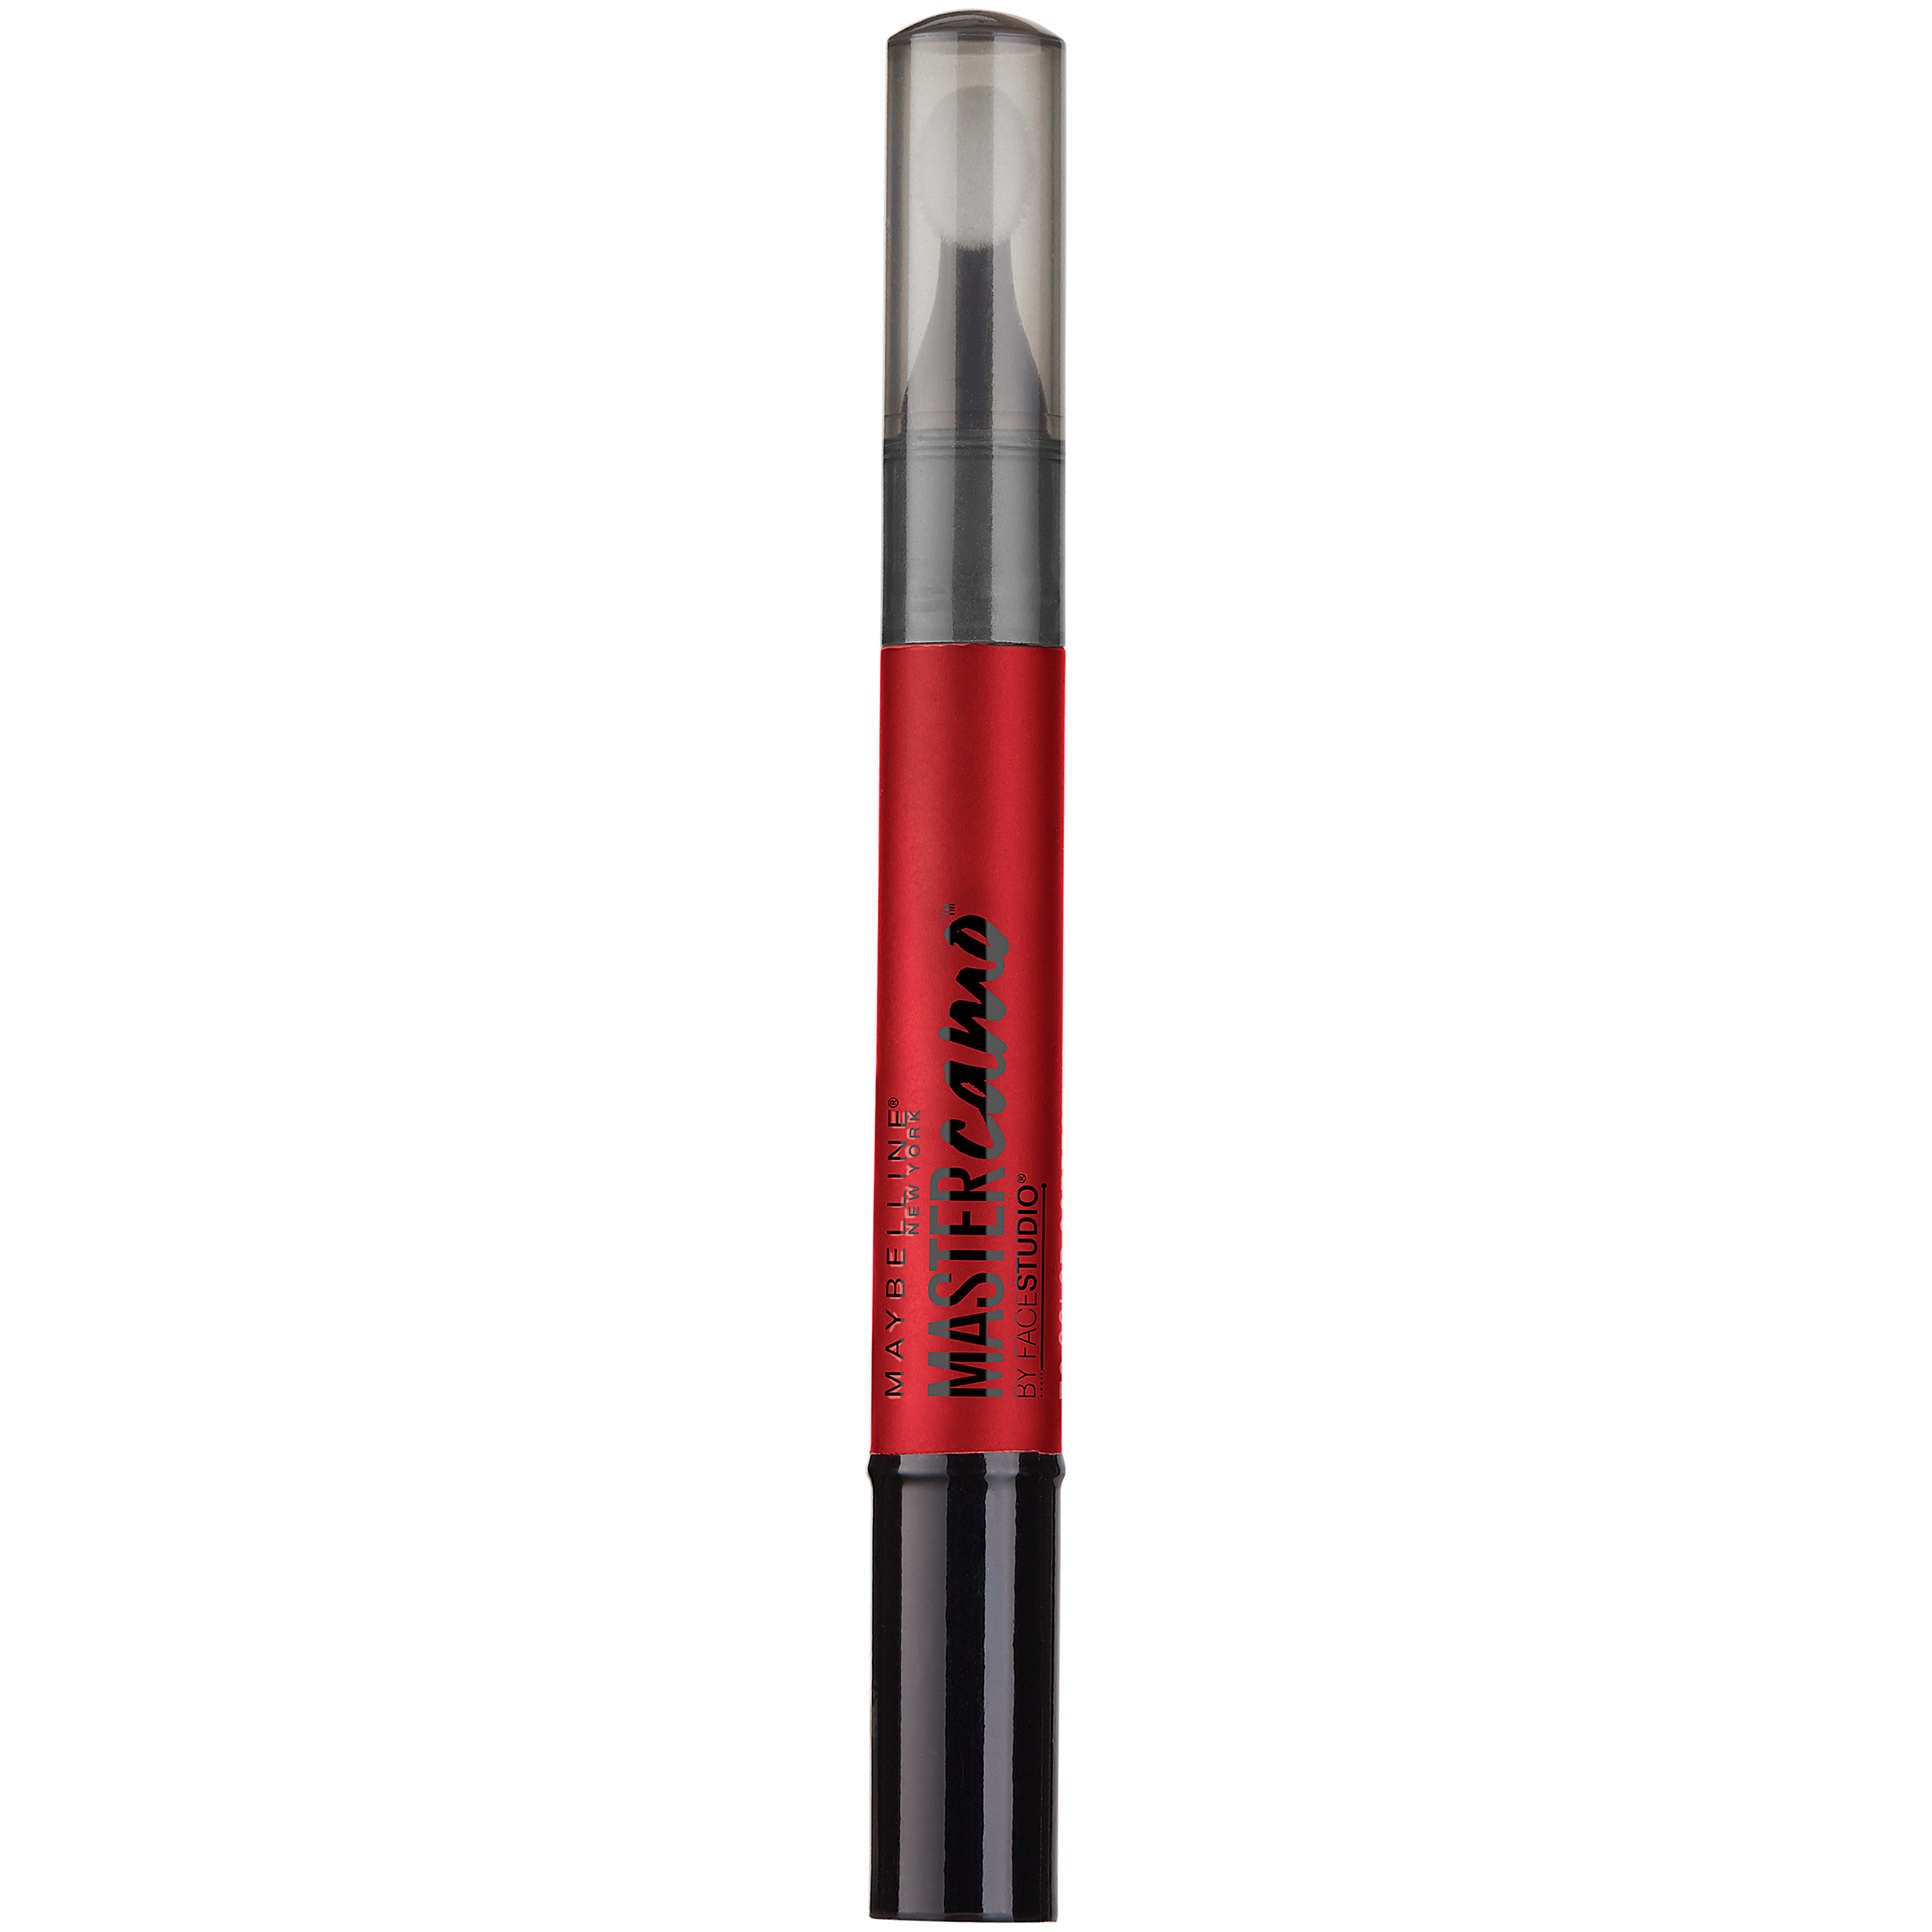 Maybelline New York Maybelline  Master Camo Color Correcting Pen, Red For Dark Circles, deep, 0.05 fl. oz.